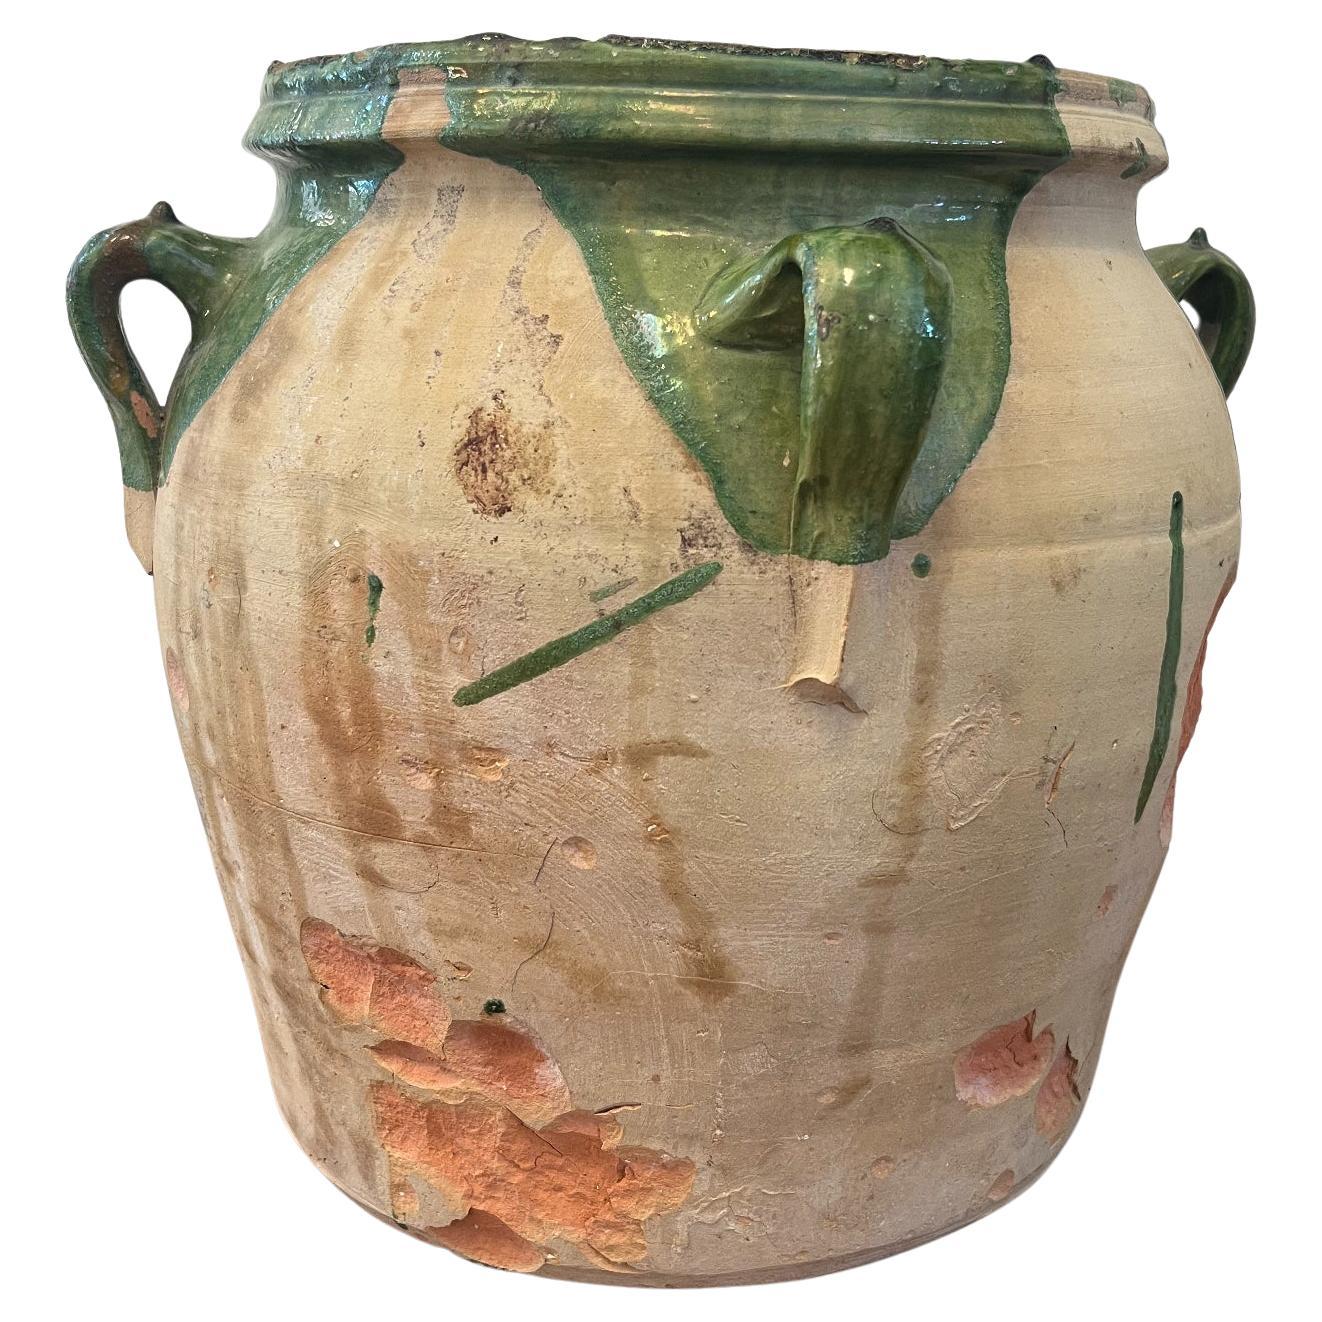 Late 19th Century Large Green Glazed Terra Cotta “Confit” Pot with Four Handles